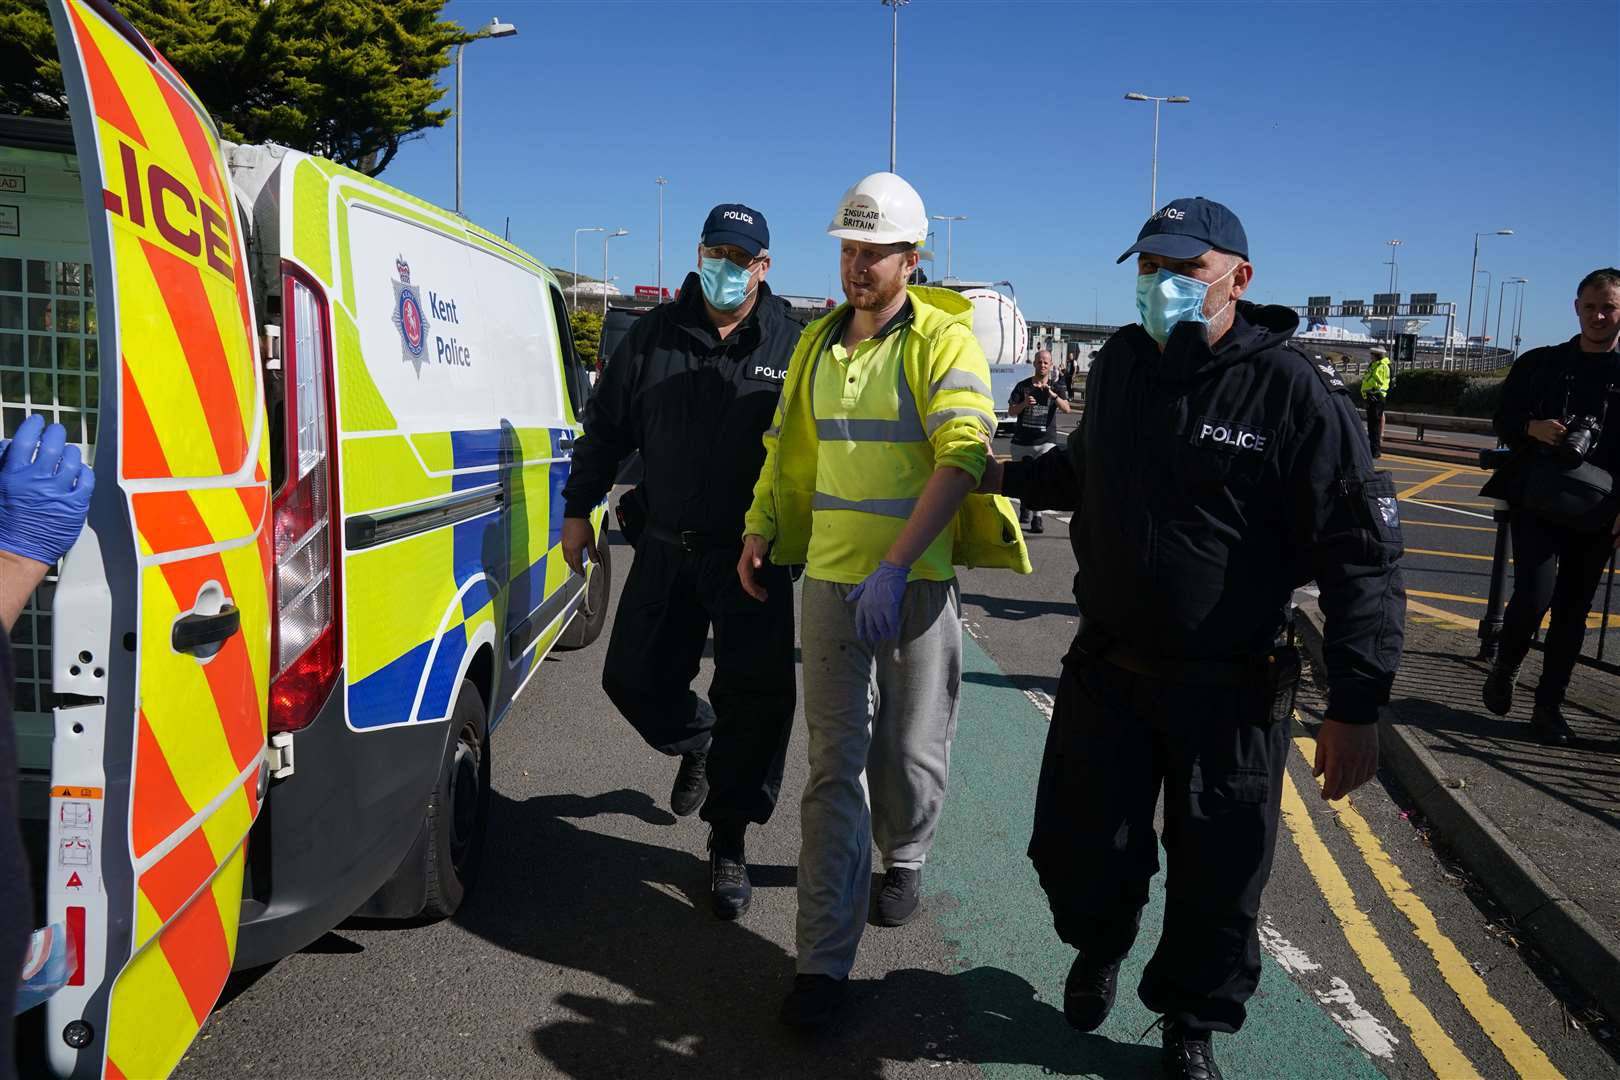 Police lead away a protester from Insulate Britain, as they block the A20 in Kent (Gareth Fuller/PA)